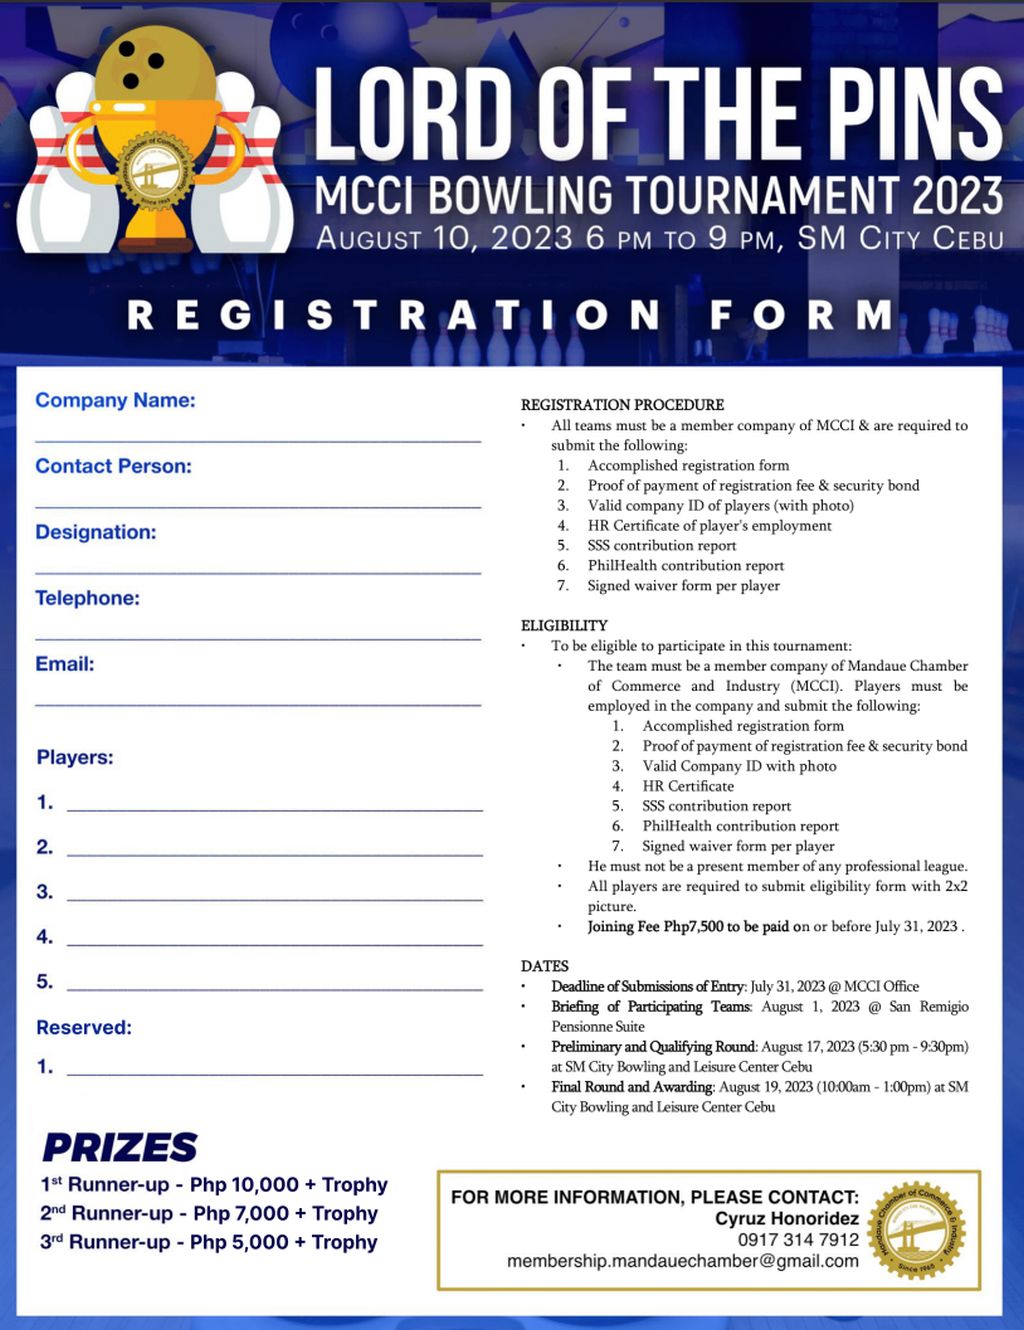 C:\Users\GCPI-ROBBY\Desktop\PRS\PR 2 - LORD OF THE PINS BOWLING TOURNAMENT\BOWLING POSTER 2.jpg